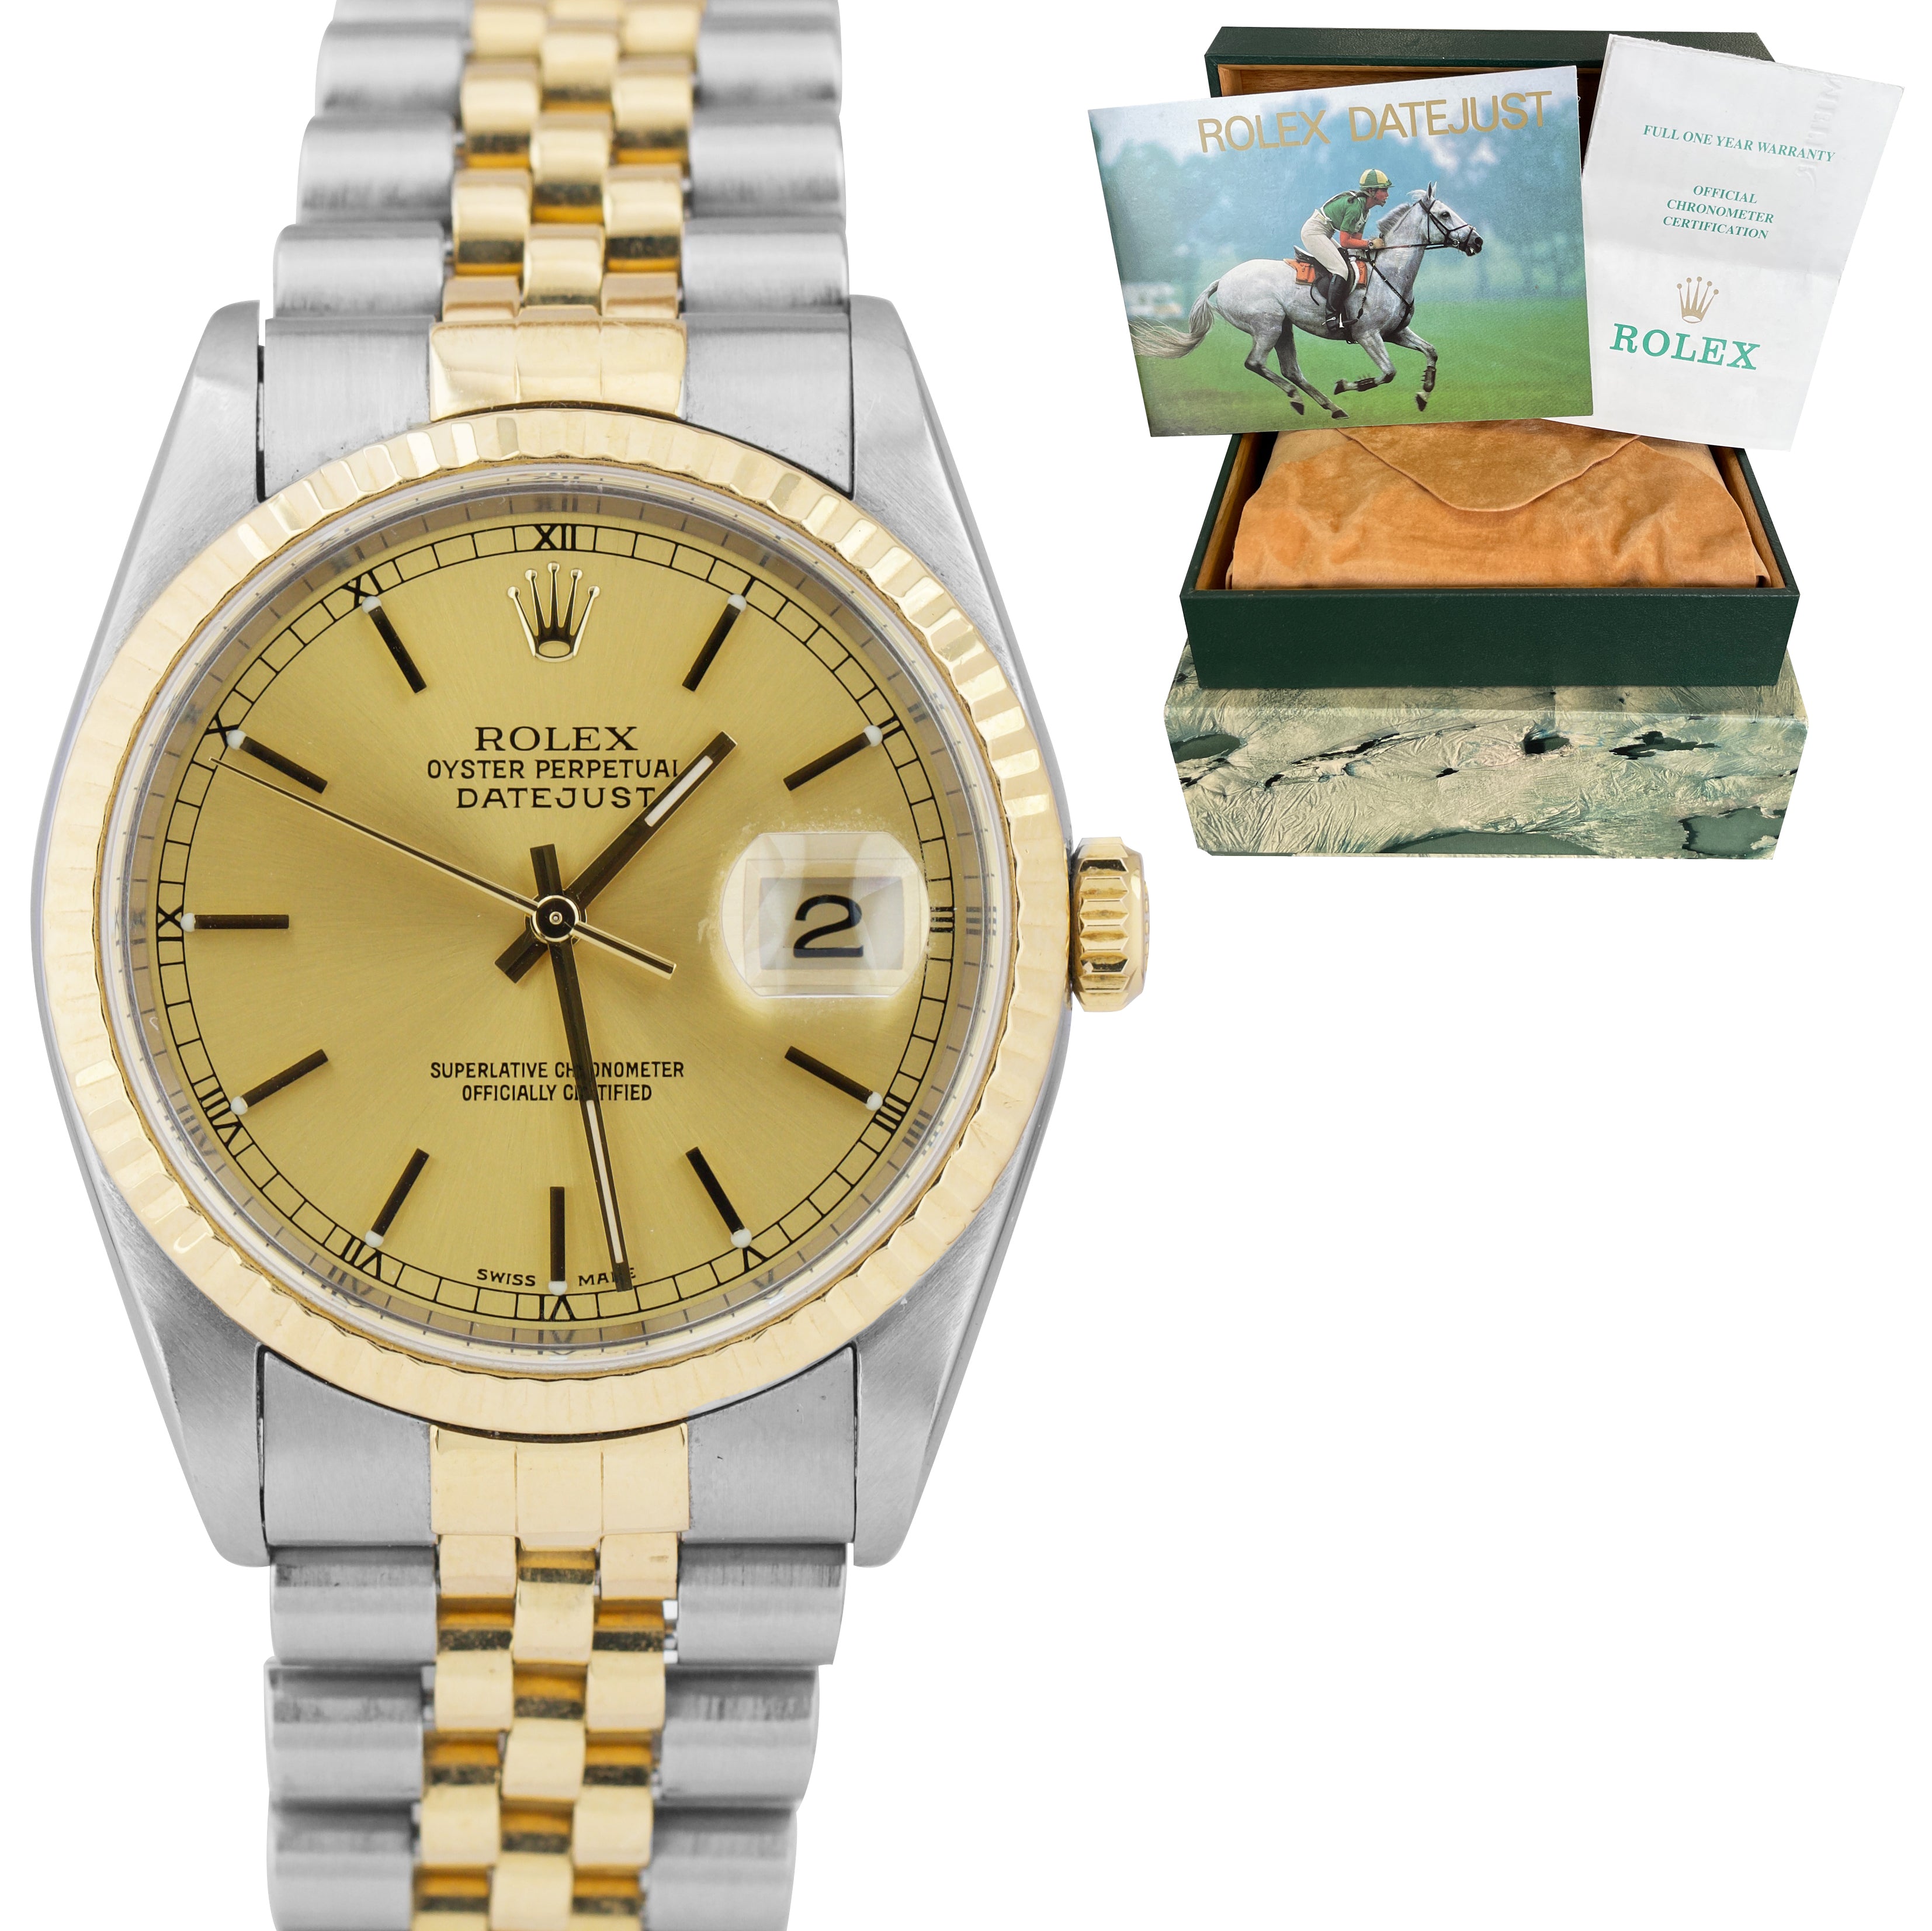 pensum Venture At vise 1997 Rolex DateJust 36mm 18K Two-Tone NO HOLES Champagne Jubilee Watch